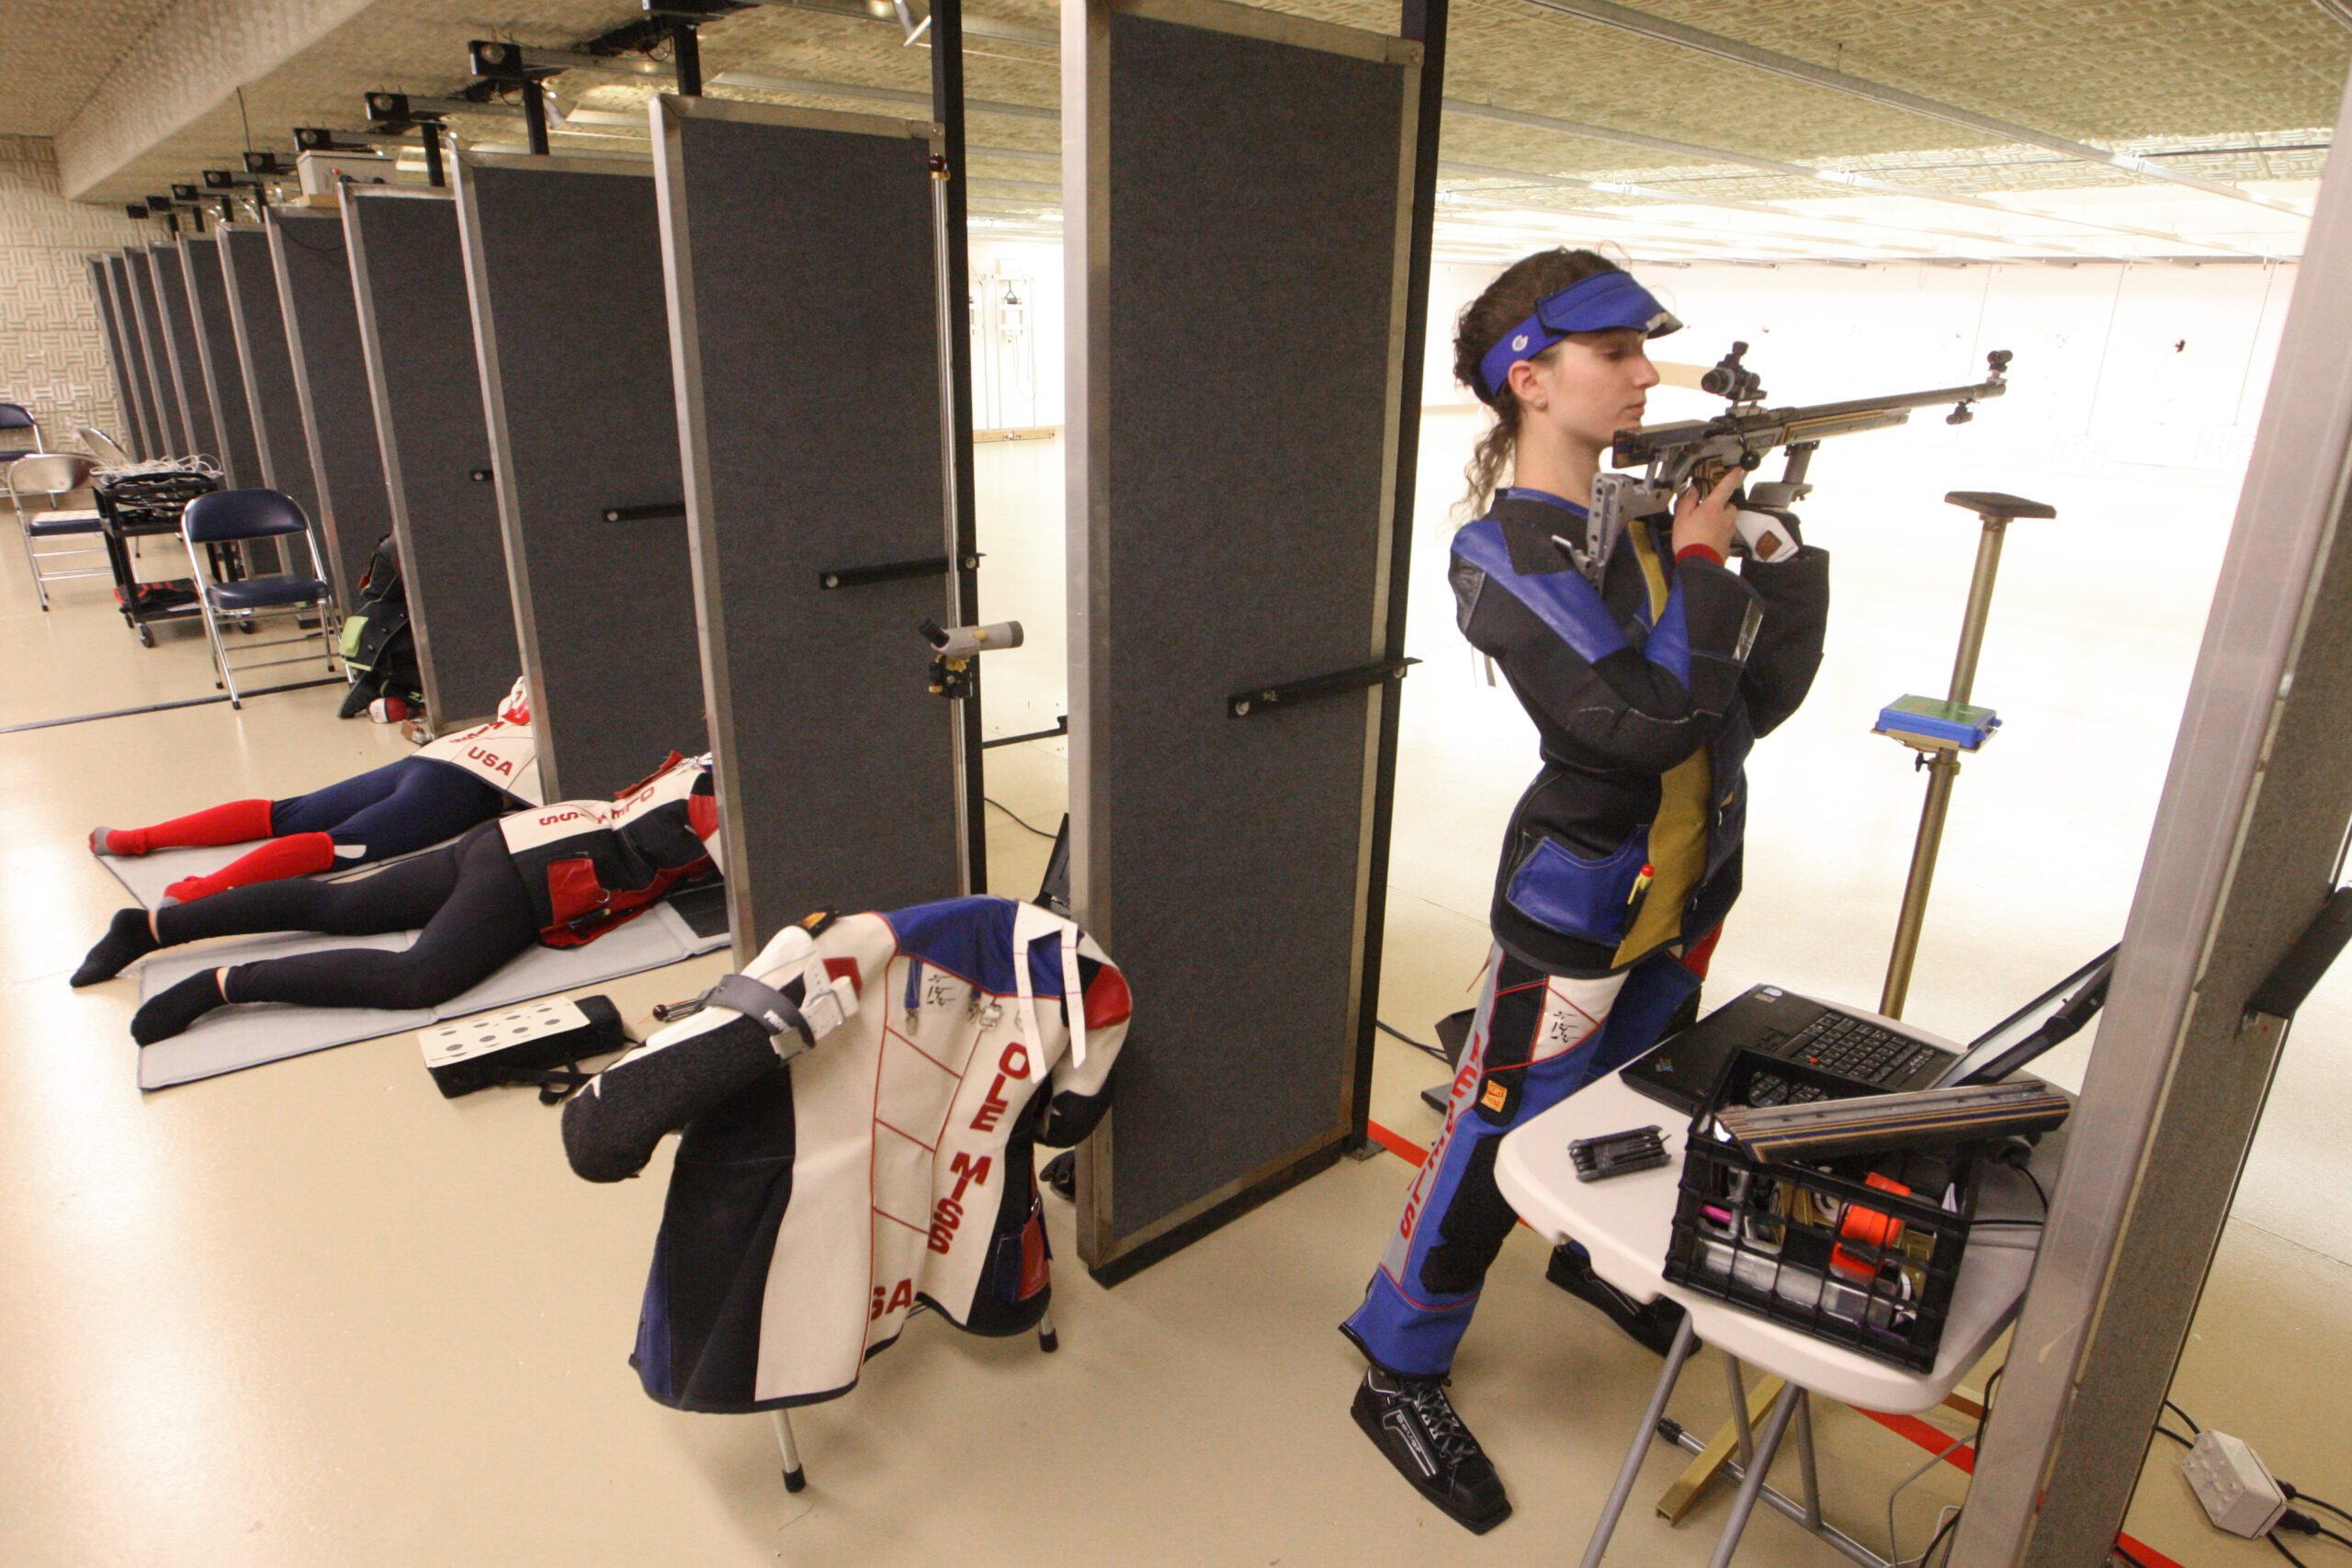 C. Todd Sherman | Daily Journal
Alivia Yeager, right, eyes a computer screen on a digital target while practicing shooting with other members of the all-female Ole Miss Rifle Team in Oxford on Tuesday.